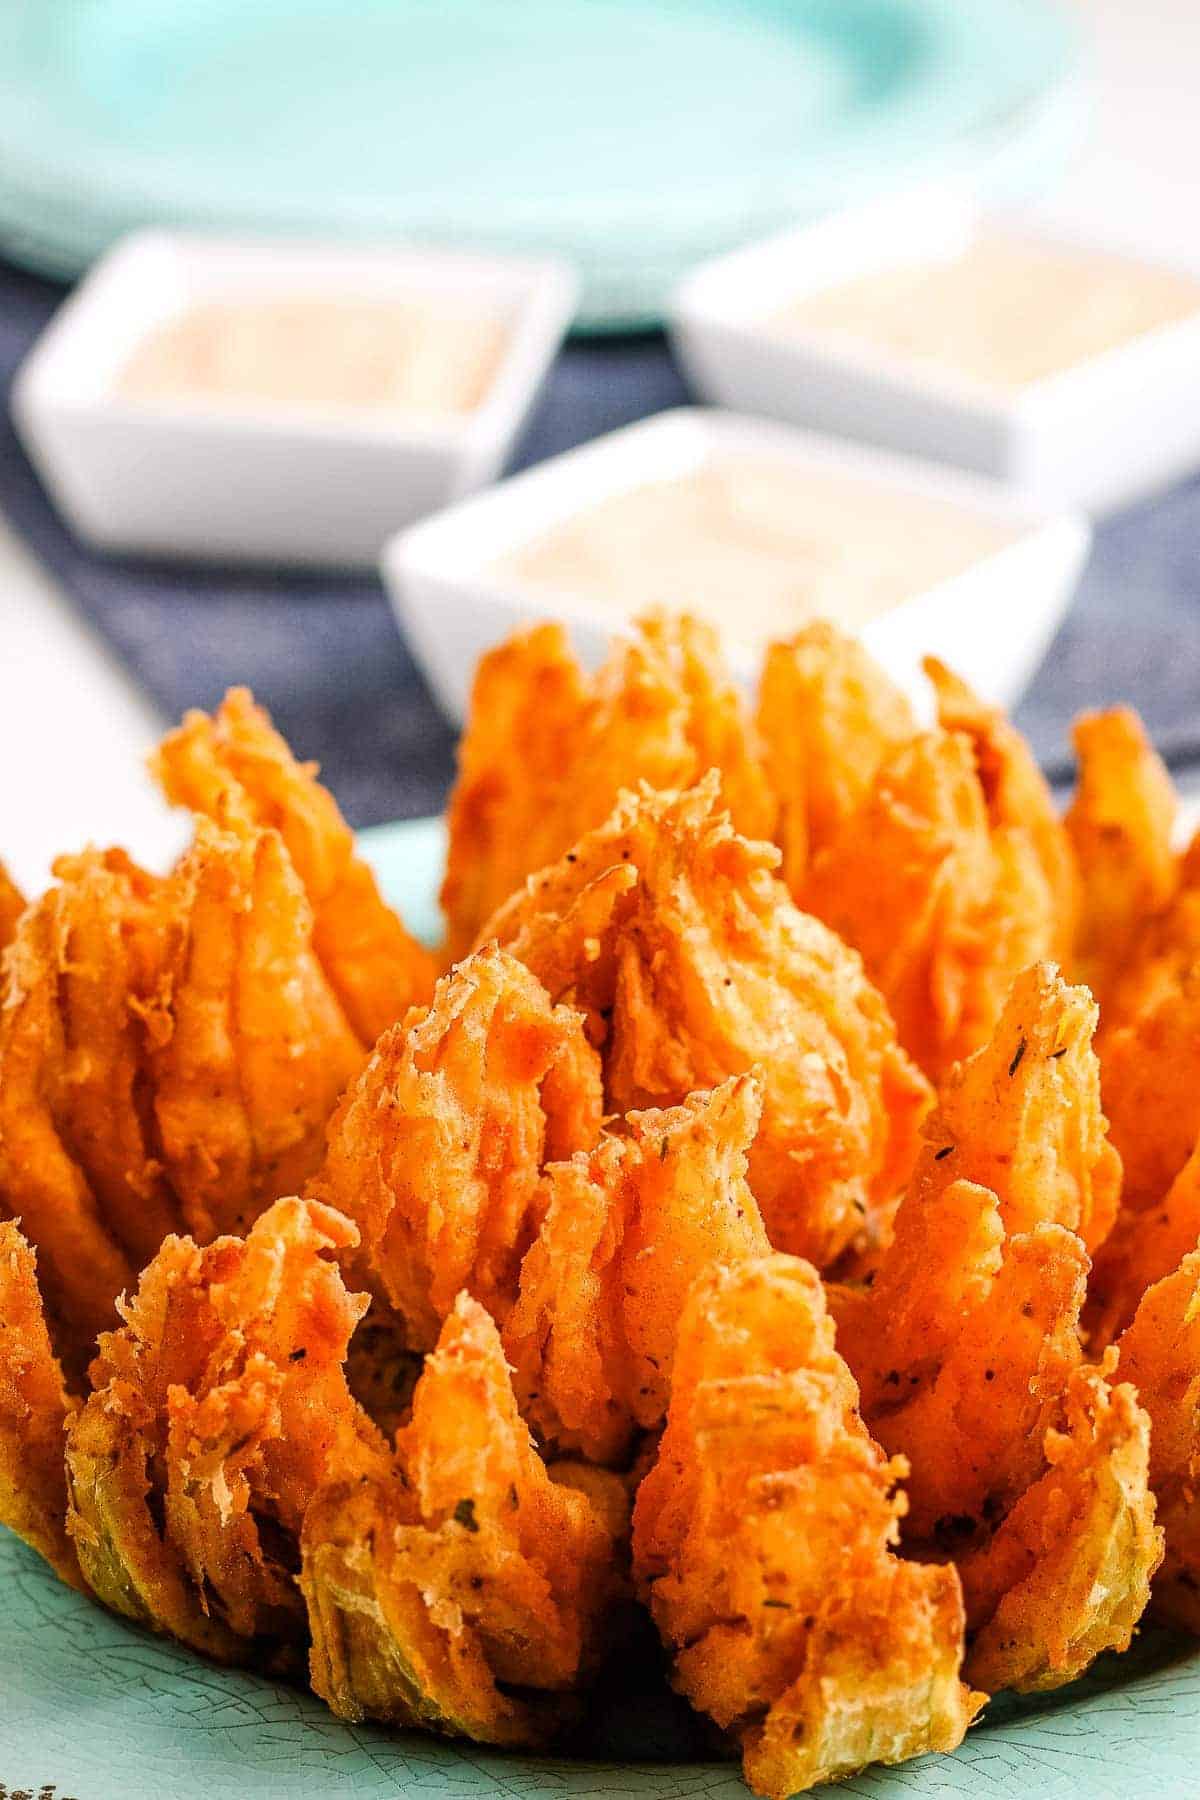 Blooming onion with spicy breading